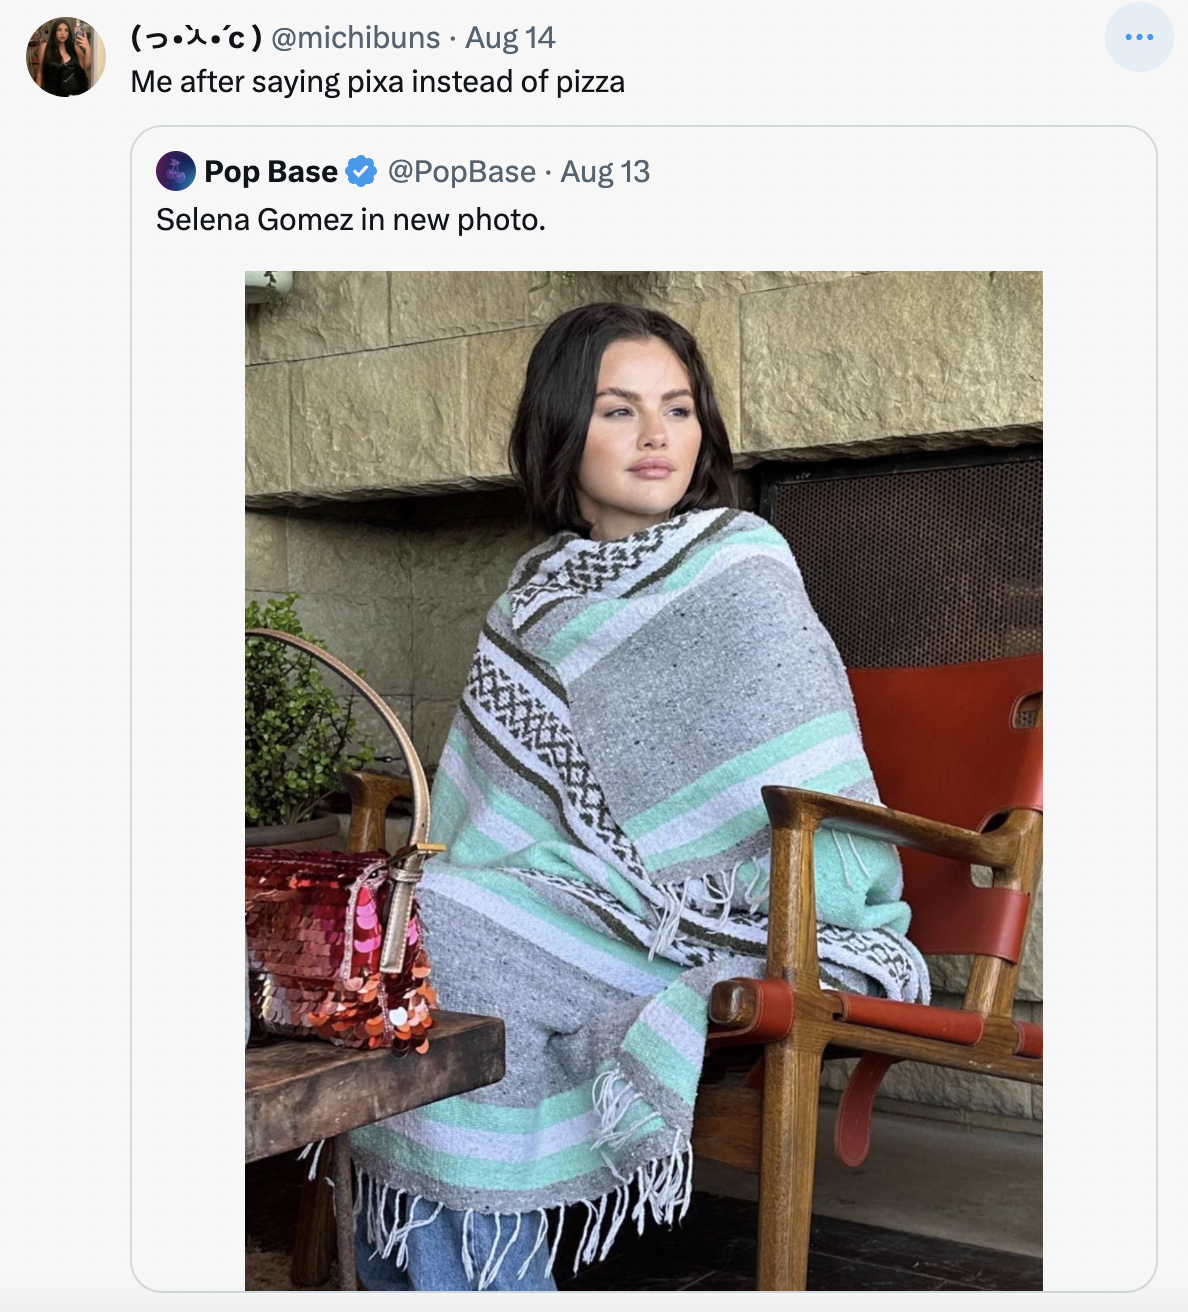 selena gomez in a blanket - shoulder - >..c Aug 14 Me after saying pixa instead of pizza Pop Base Aug 13 Selena Gomez in new photo. 274